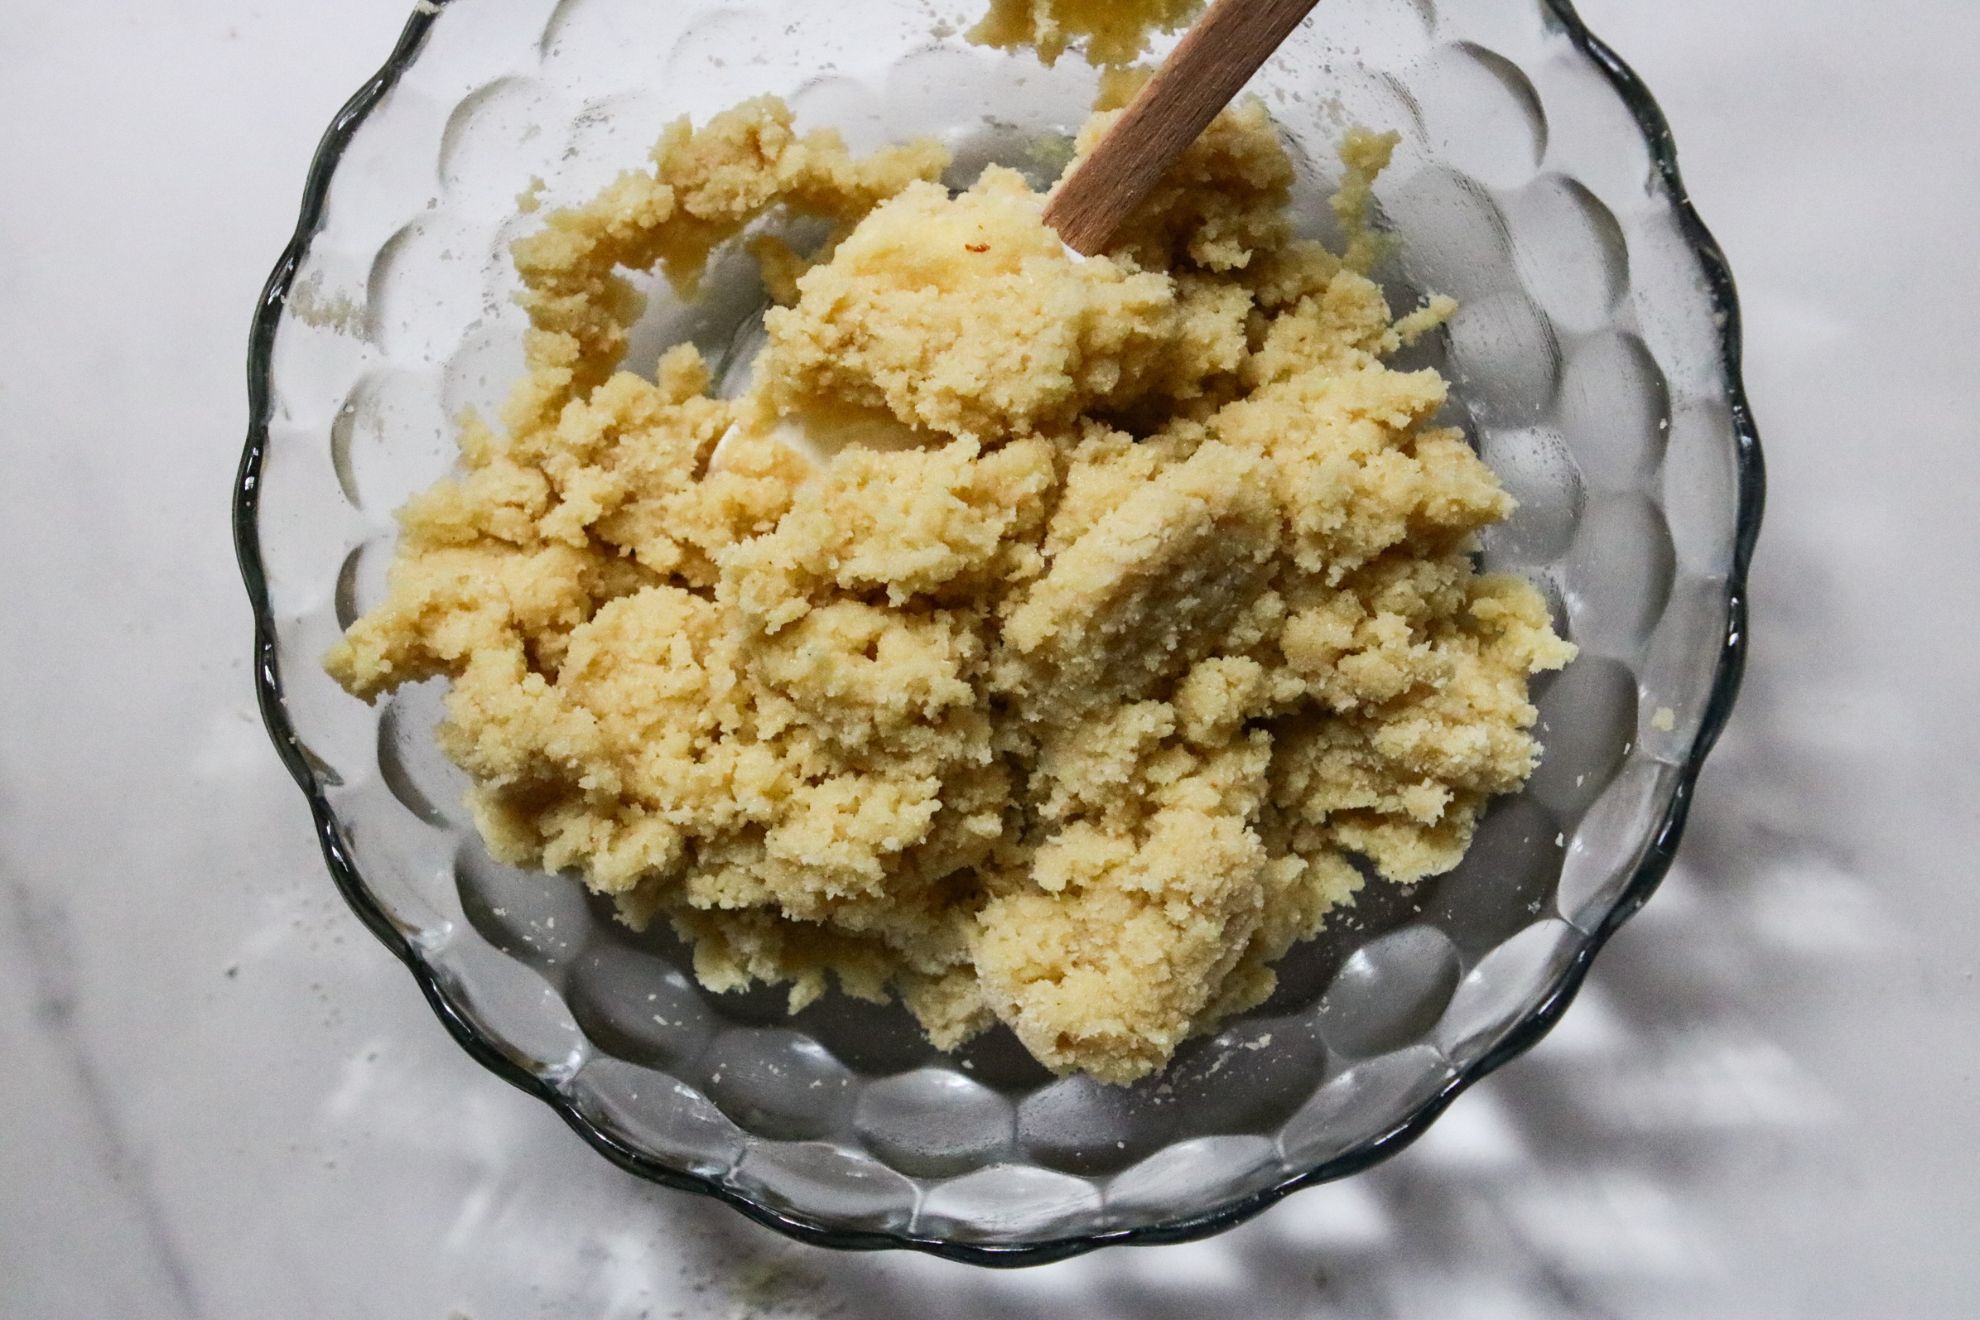 This is a horizontal overhead image of a glass bowl with a raw shortbread mixture. A spatula is in the bowl with the mixture. The bowl sits on a white marble counter.